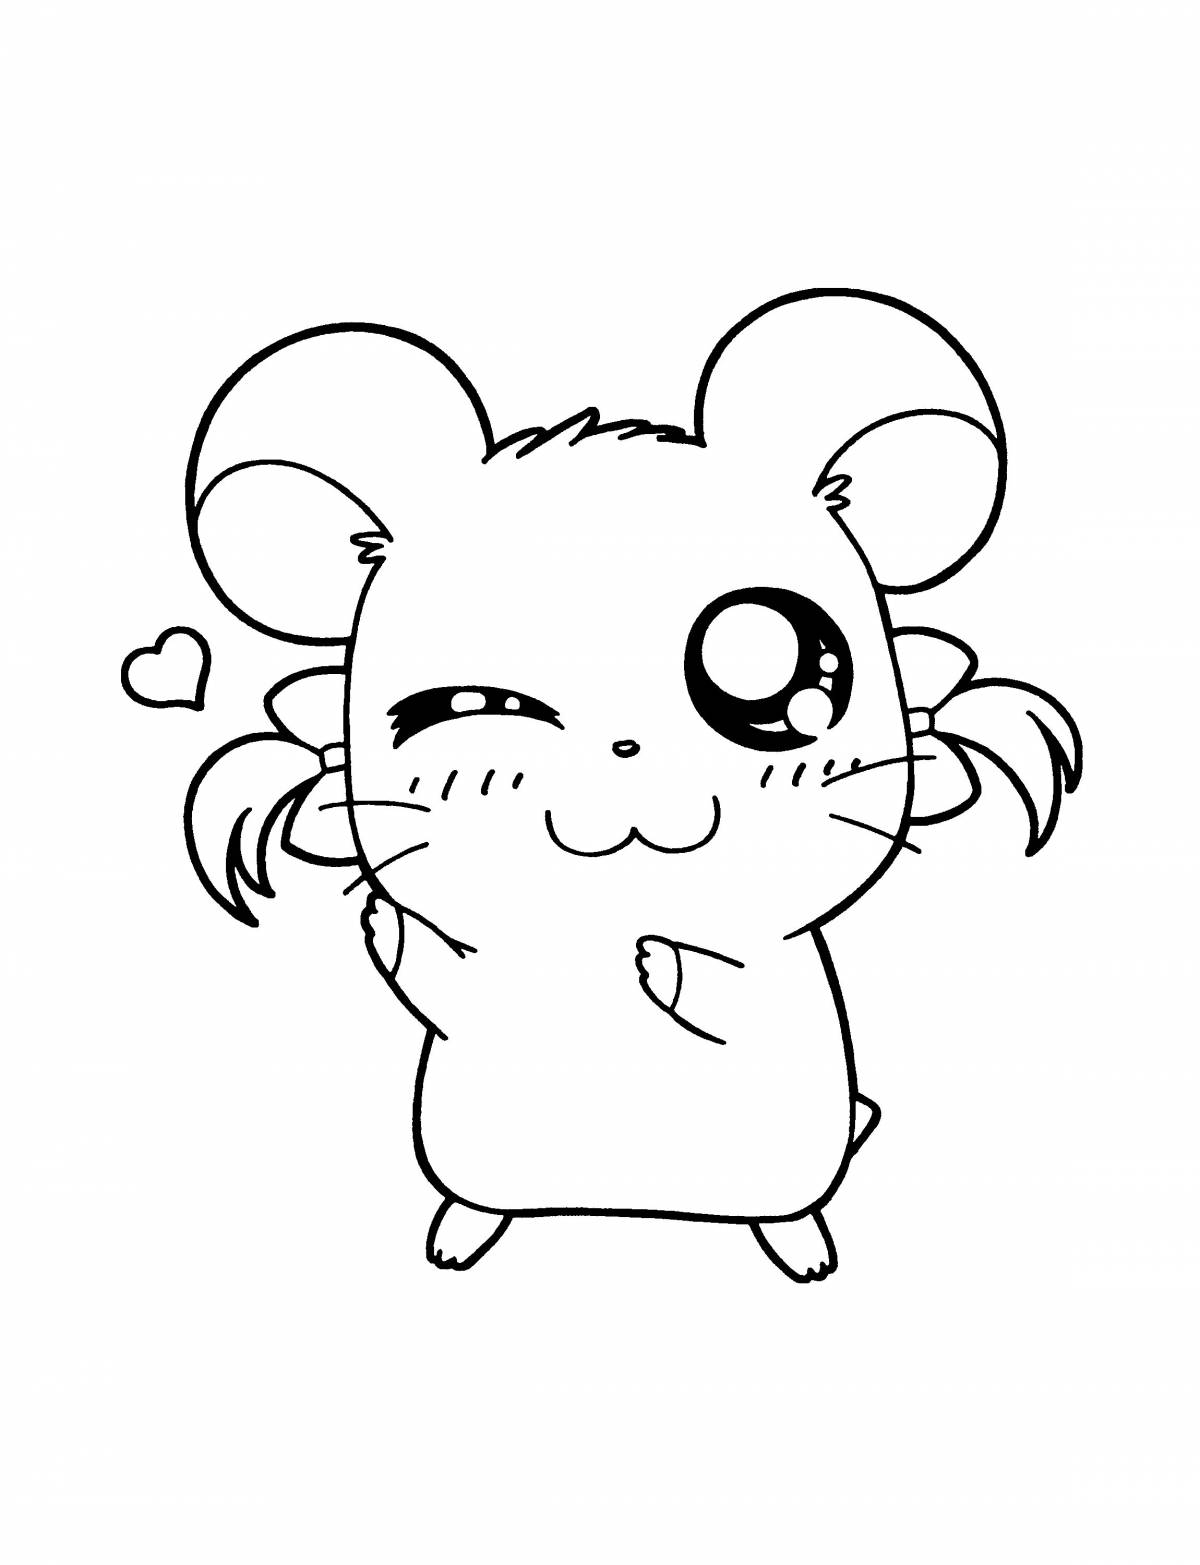 Anime animal coloring pages for girls